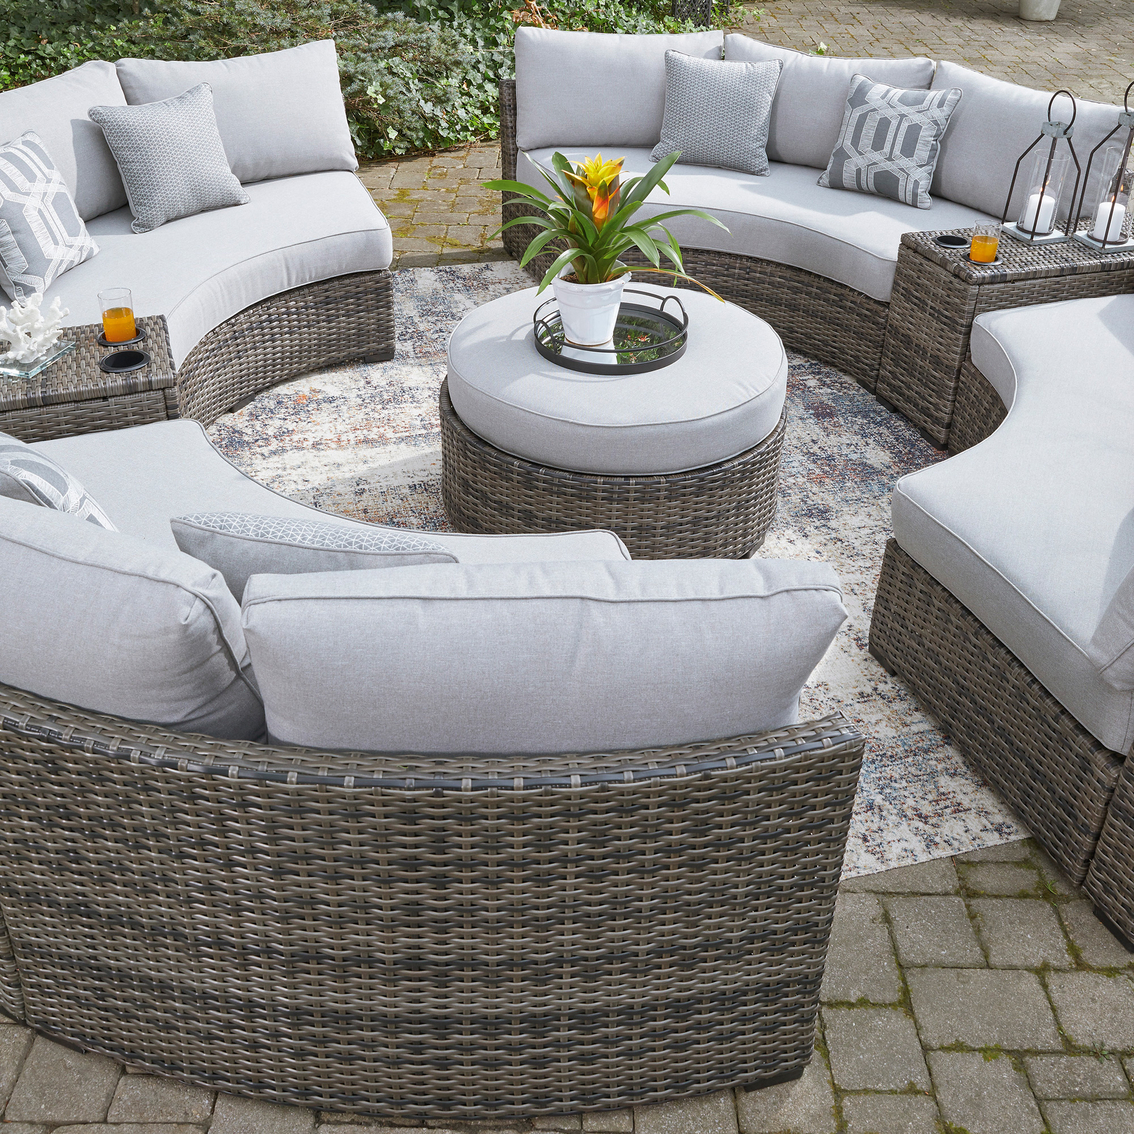 Signature Design by Ashley Harbor Court 7 pc. Outdoor Set - Image 6 of 6